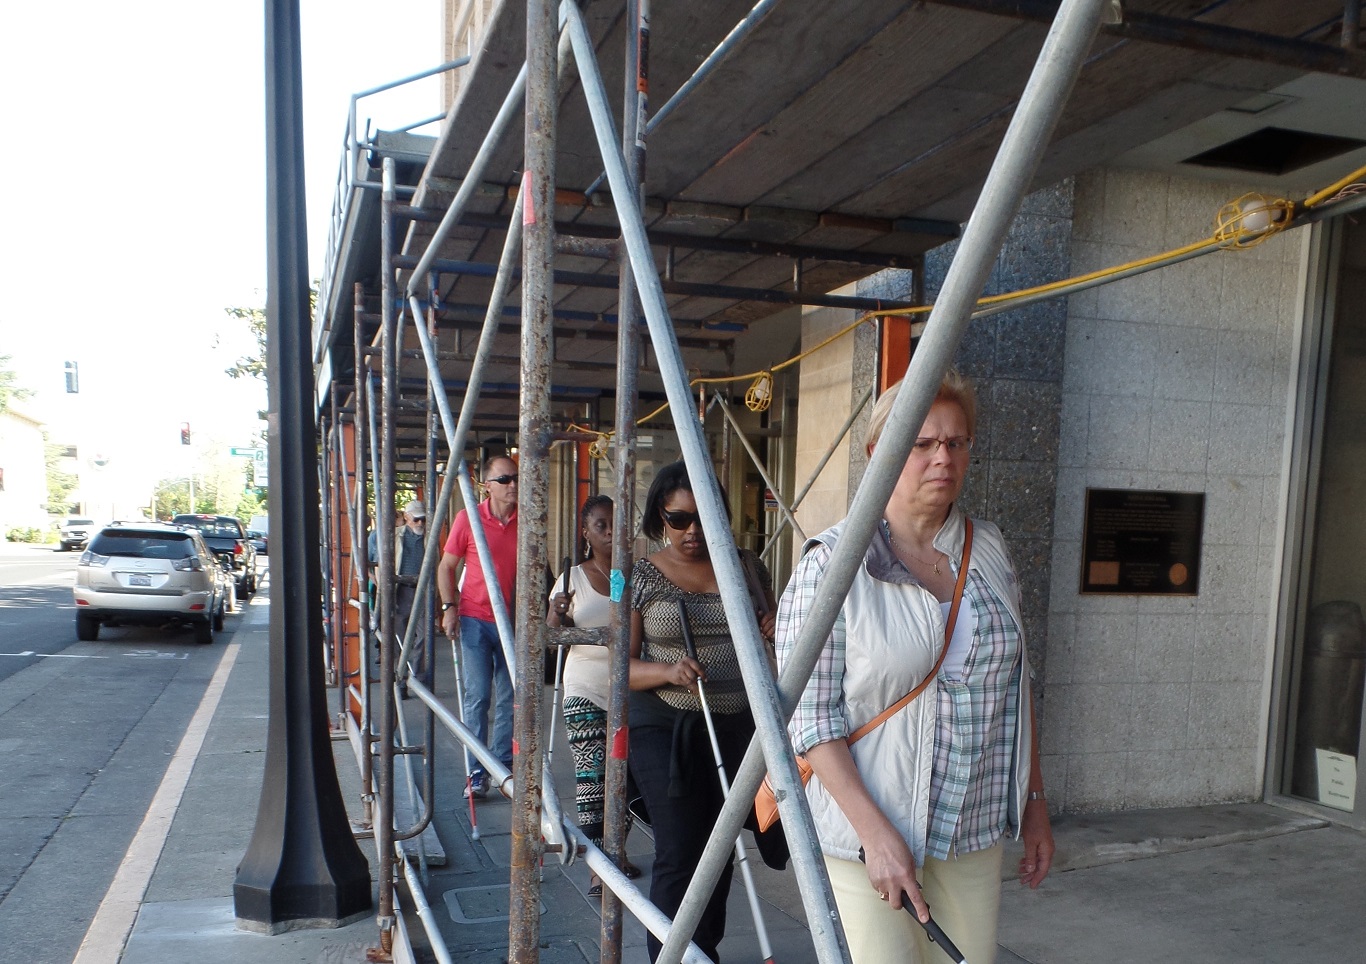 Students newer to Orientation & Mobility training took to the streets of downtown Napa utilizing the new cane skills they learned throughout the Immersion week. Here the group maneuvers under scaffolding set up around buildings that were damaged during the recent Napa earthquake. 